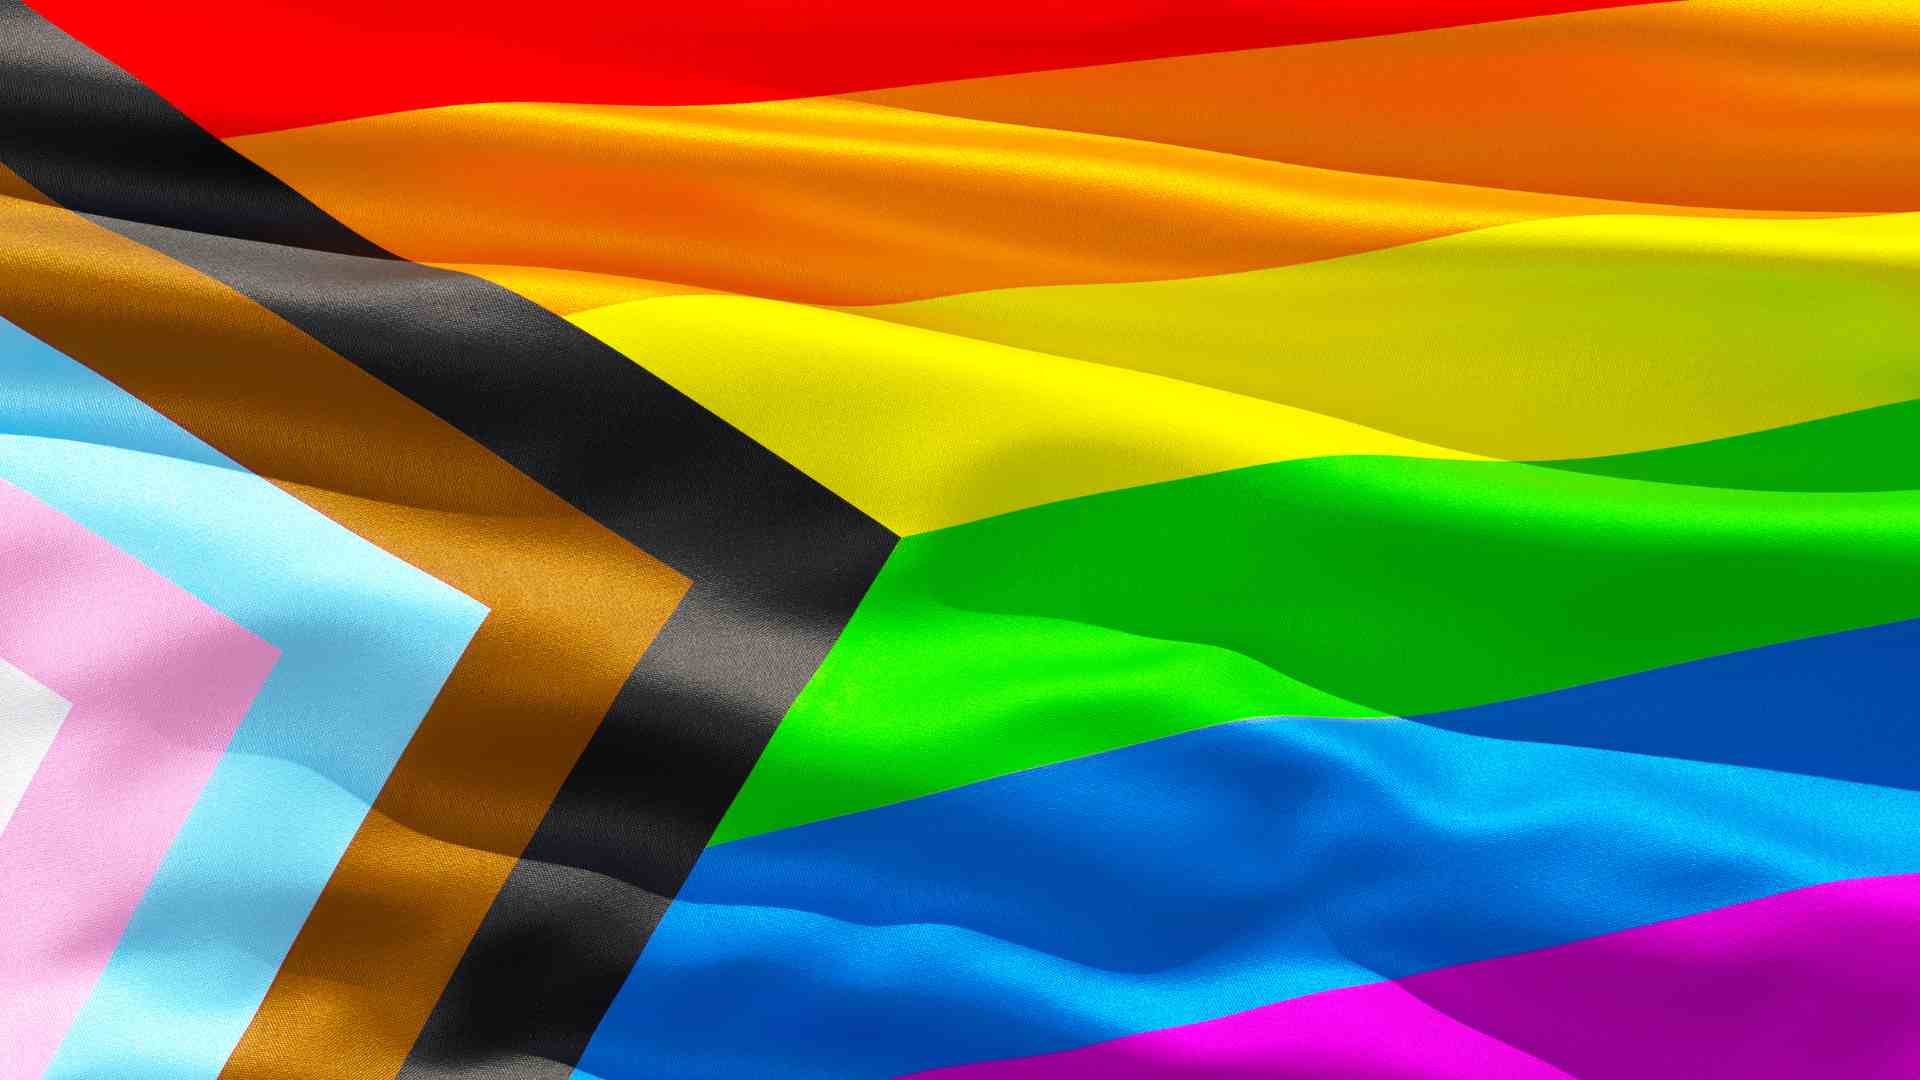 An image of the Progress Pride flag